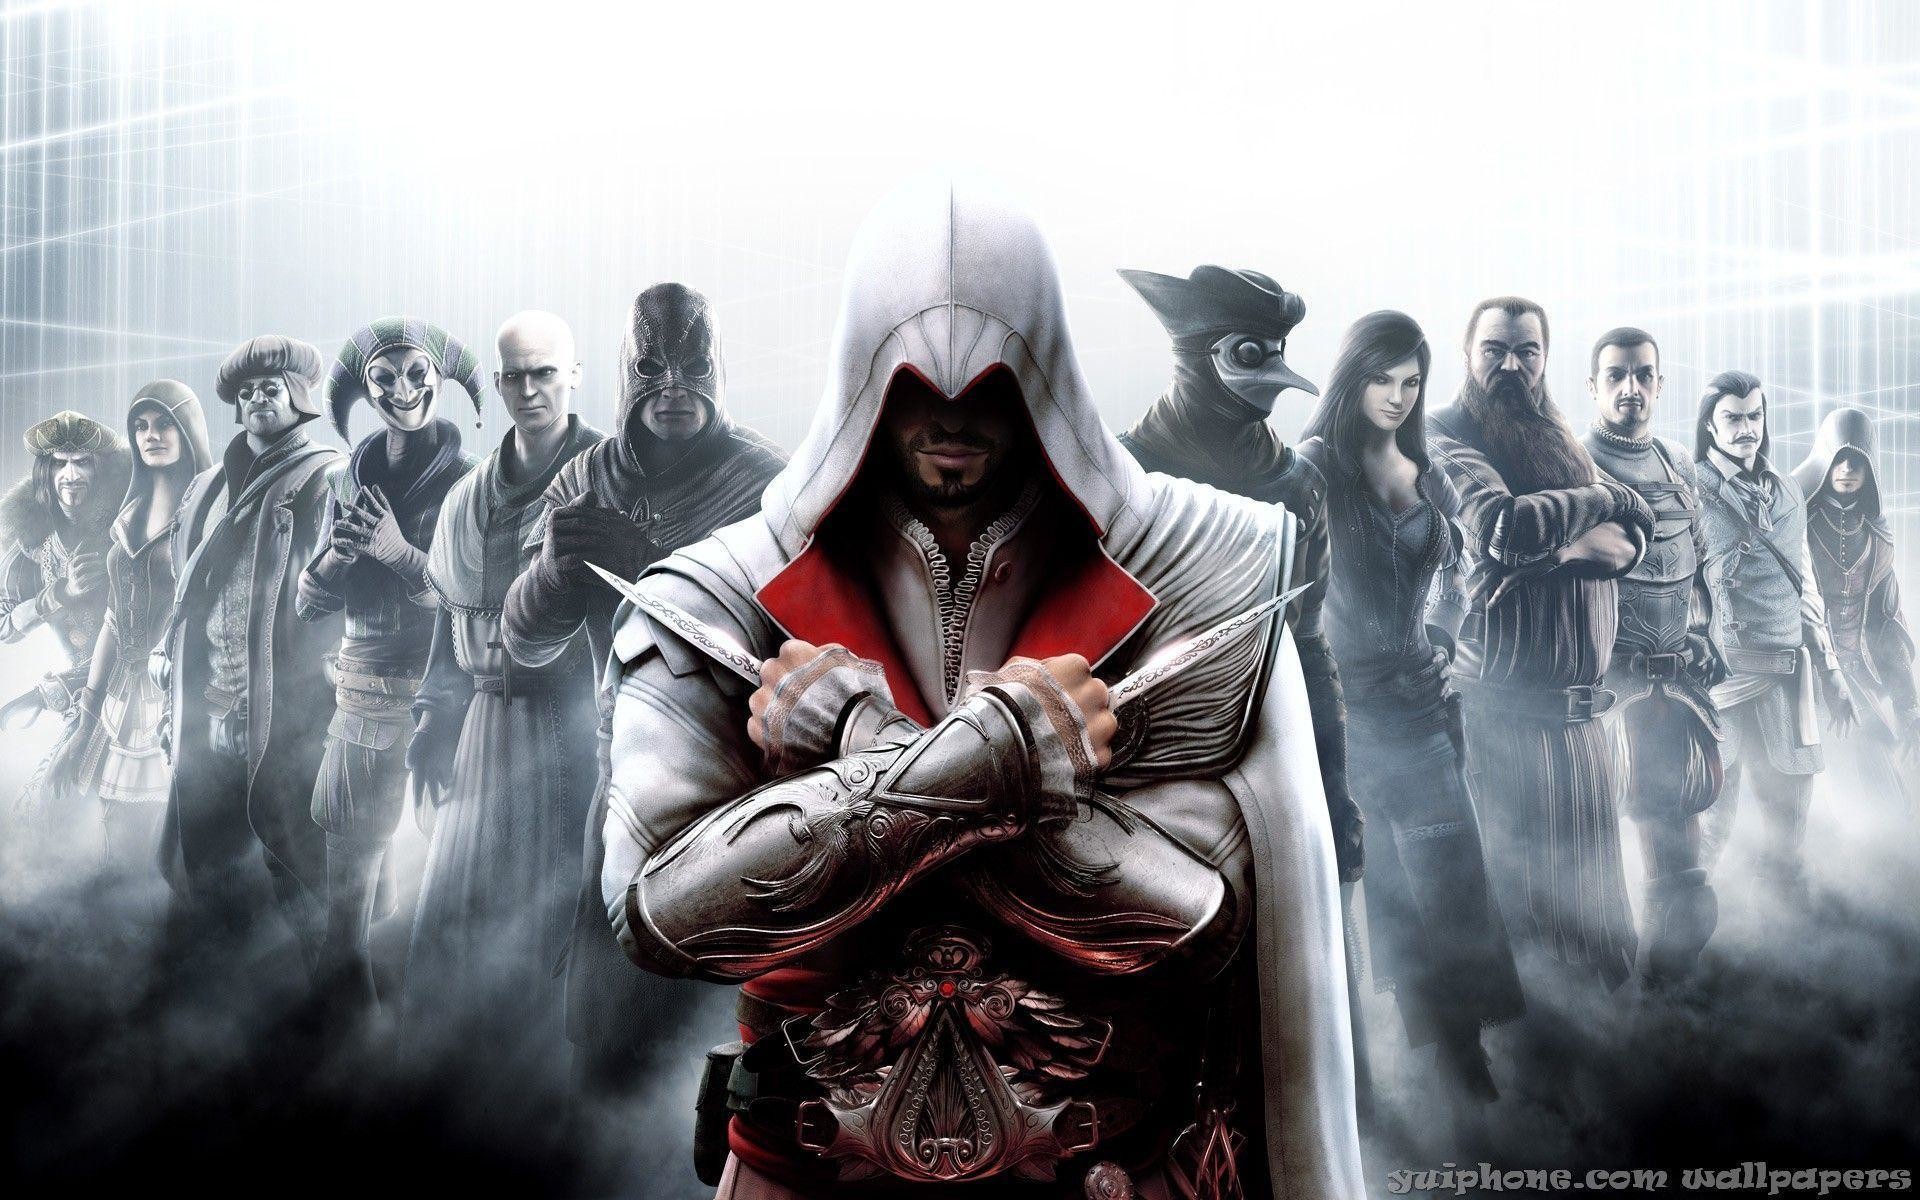 I made this Assassins Creed wallpaper 4 years ago never posted it online  until now  rassassinscreed